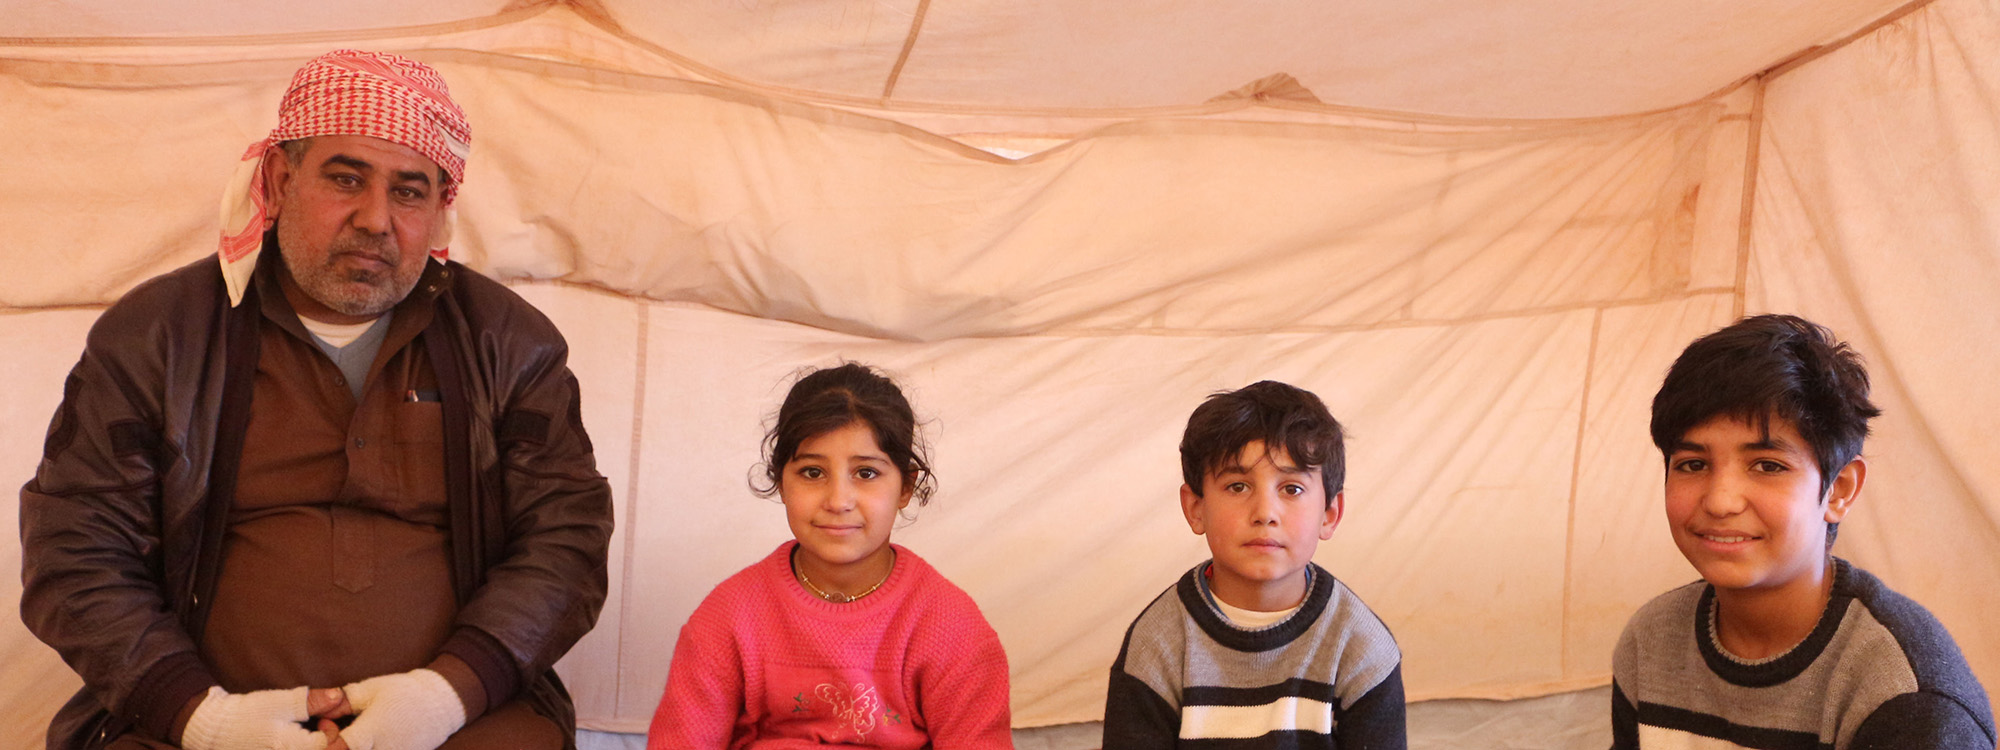 Man and three children wearing winter clothes in a tent in Syria